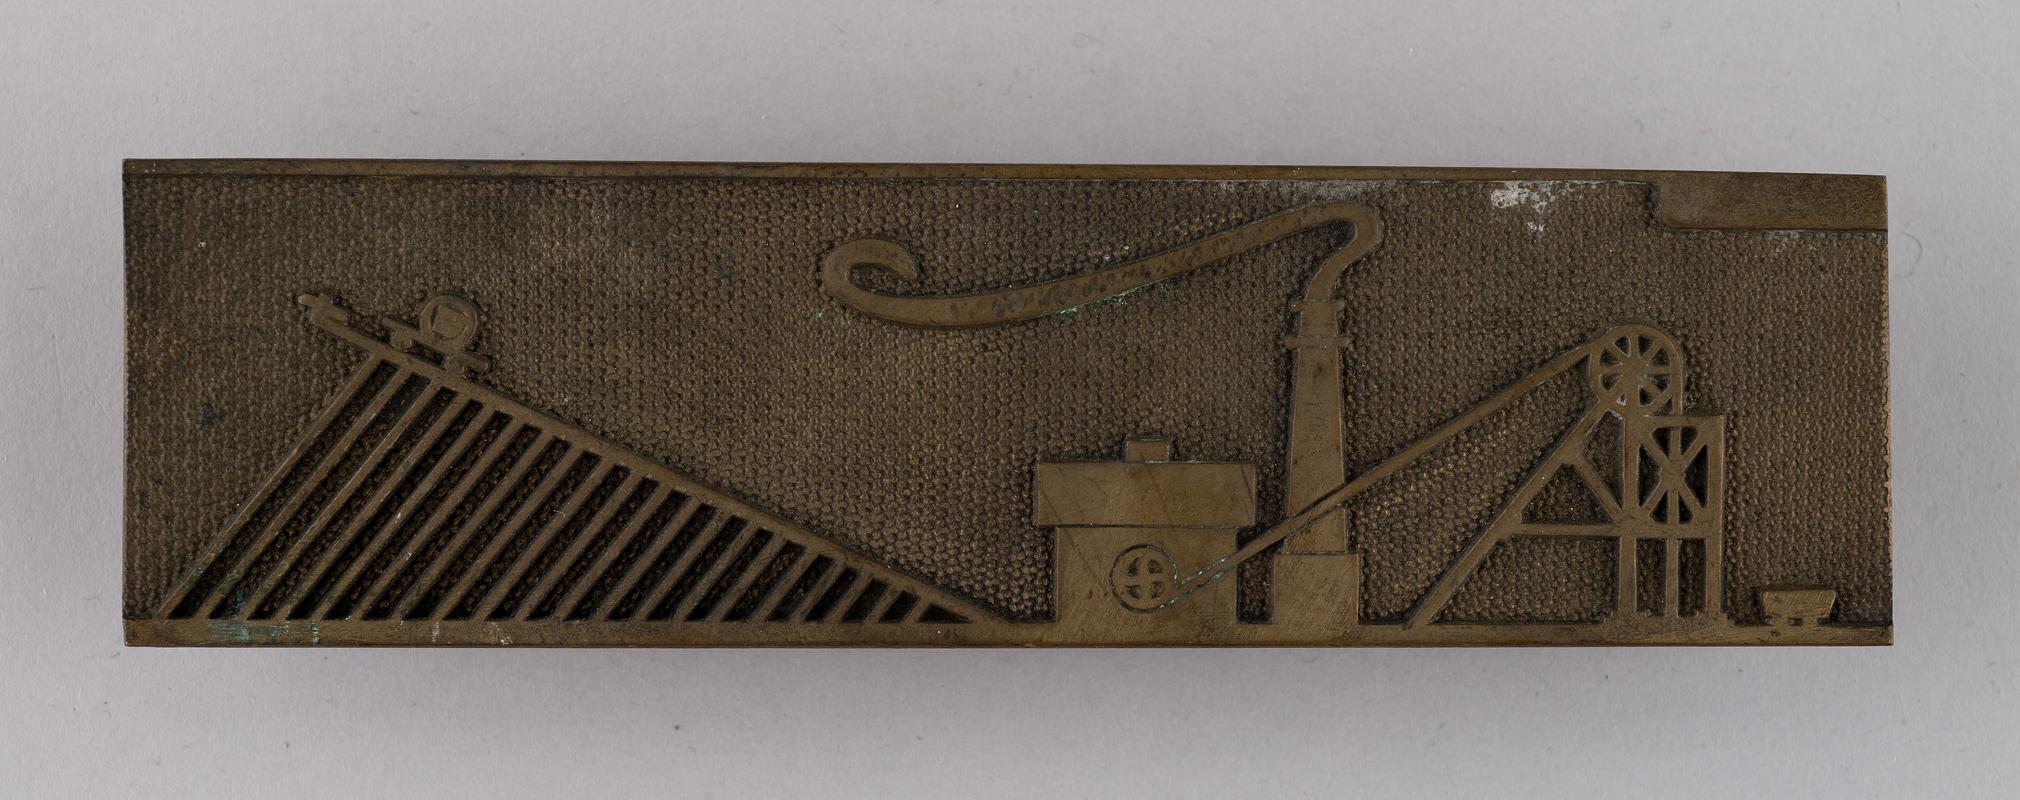 Rectangular plaque with view of a coal mine showing headgear and tip.